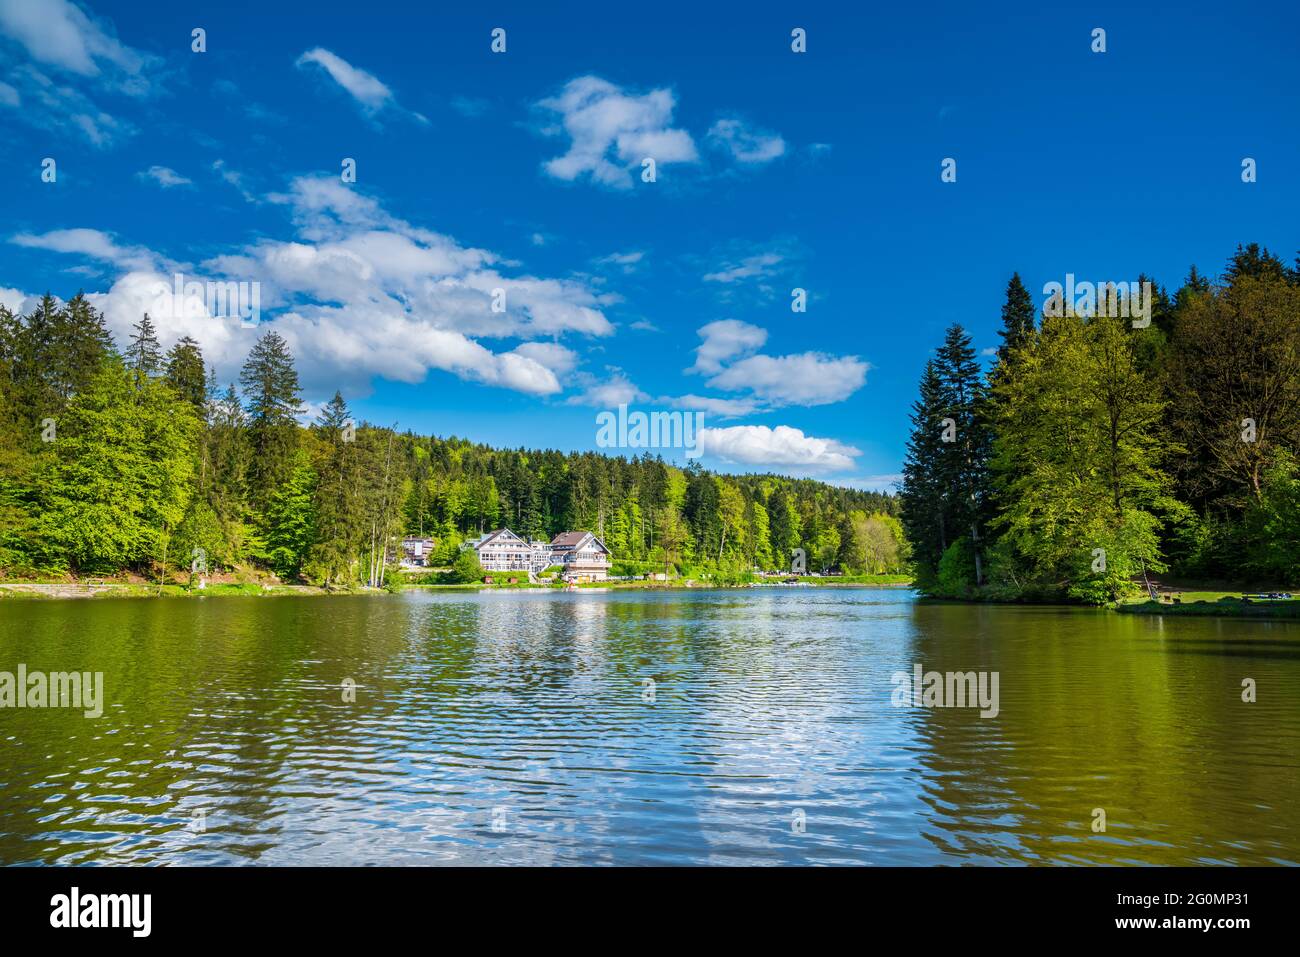 Germany, Ebnisee lake near kaisersbach in idyllic green forest nature landscape with old houses and beautiful scenery under blue sky Stock Photo